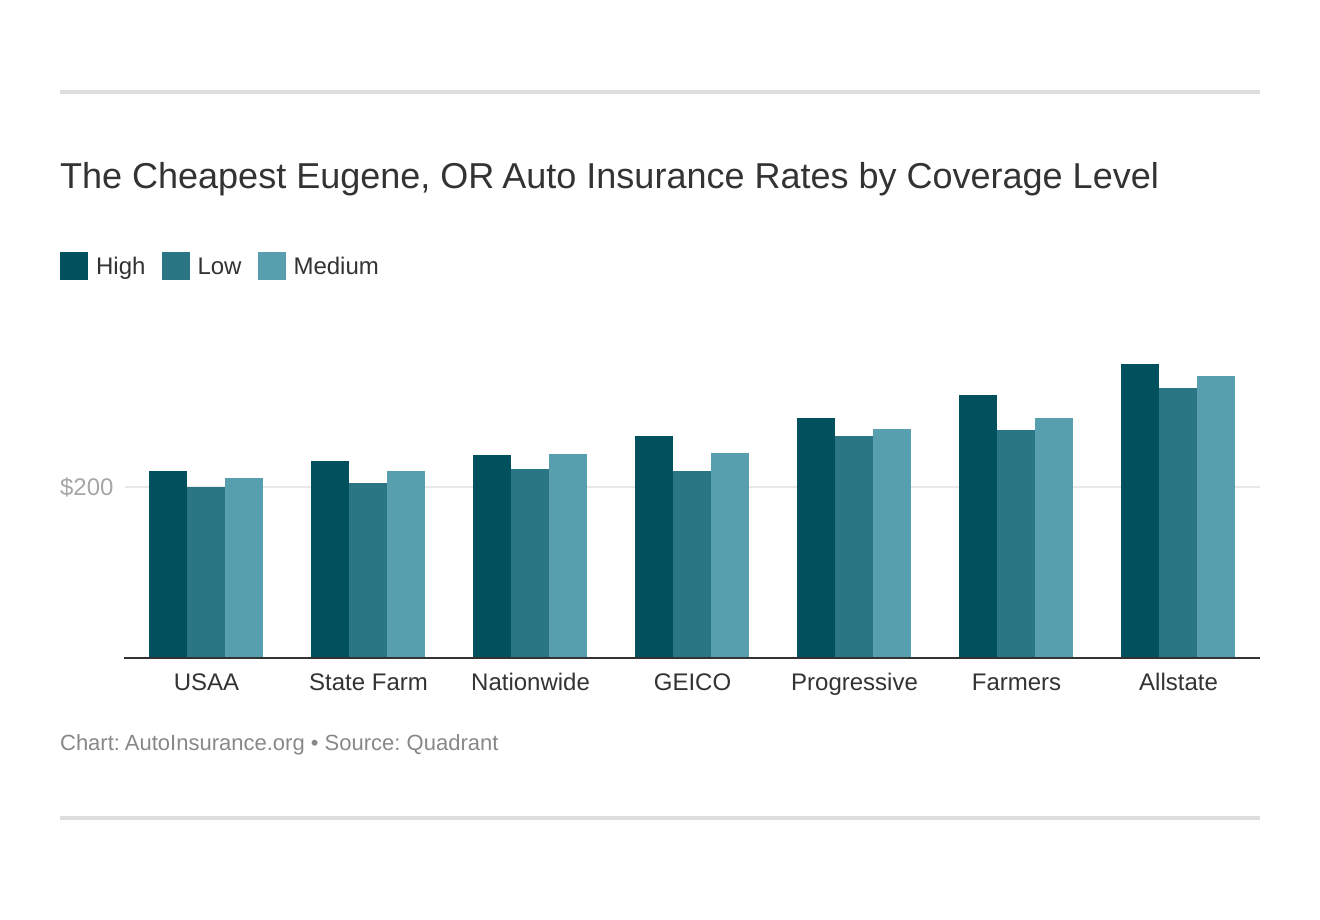 The Cheapest Eugene, OR Auto Insurance Rates by Coverage Level